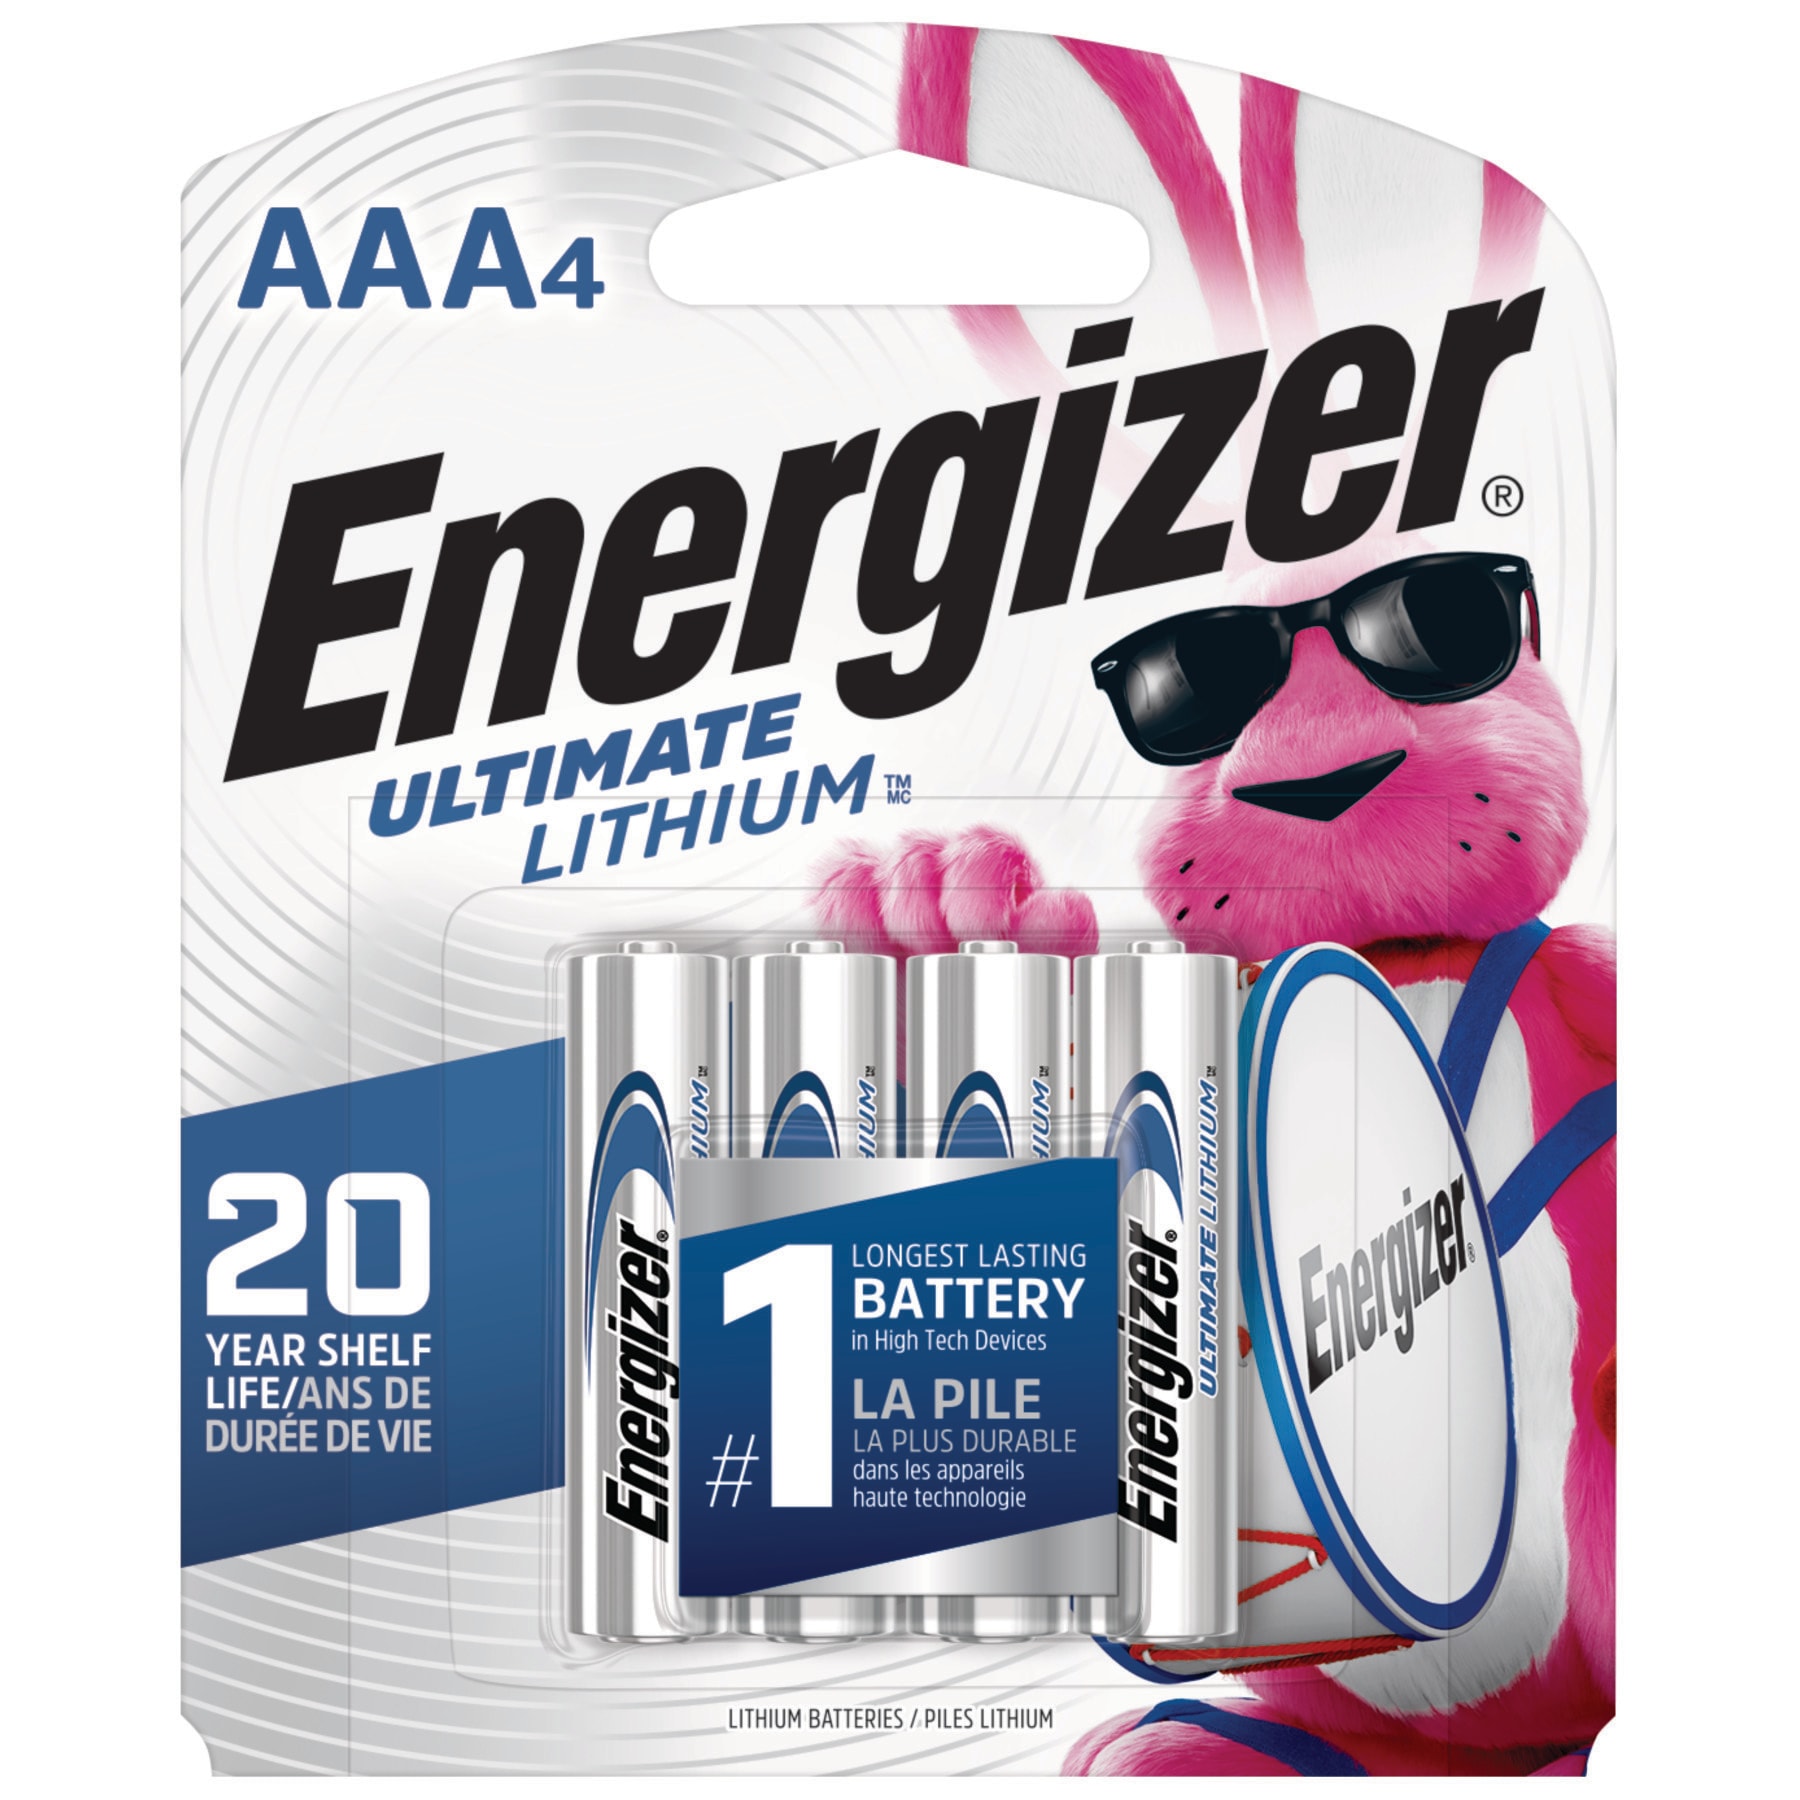 Energizer AAA Lithium Batteries Ultimate Lithium Triple A Battery